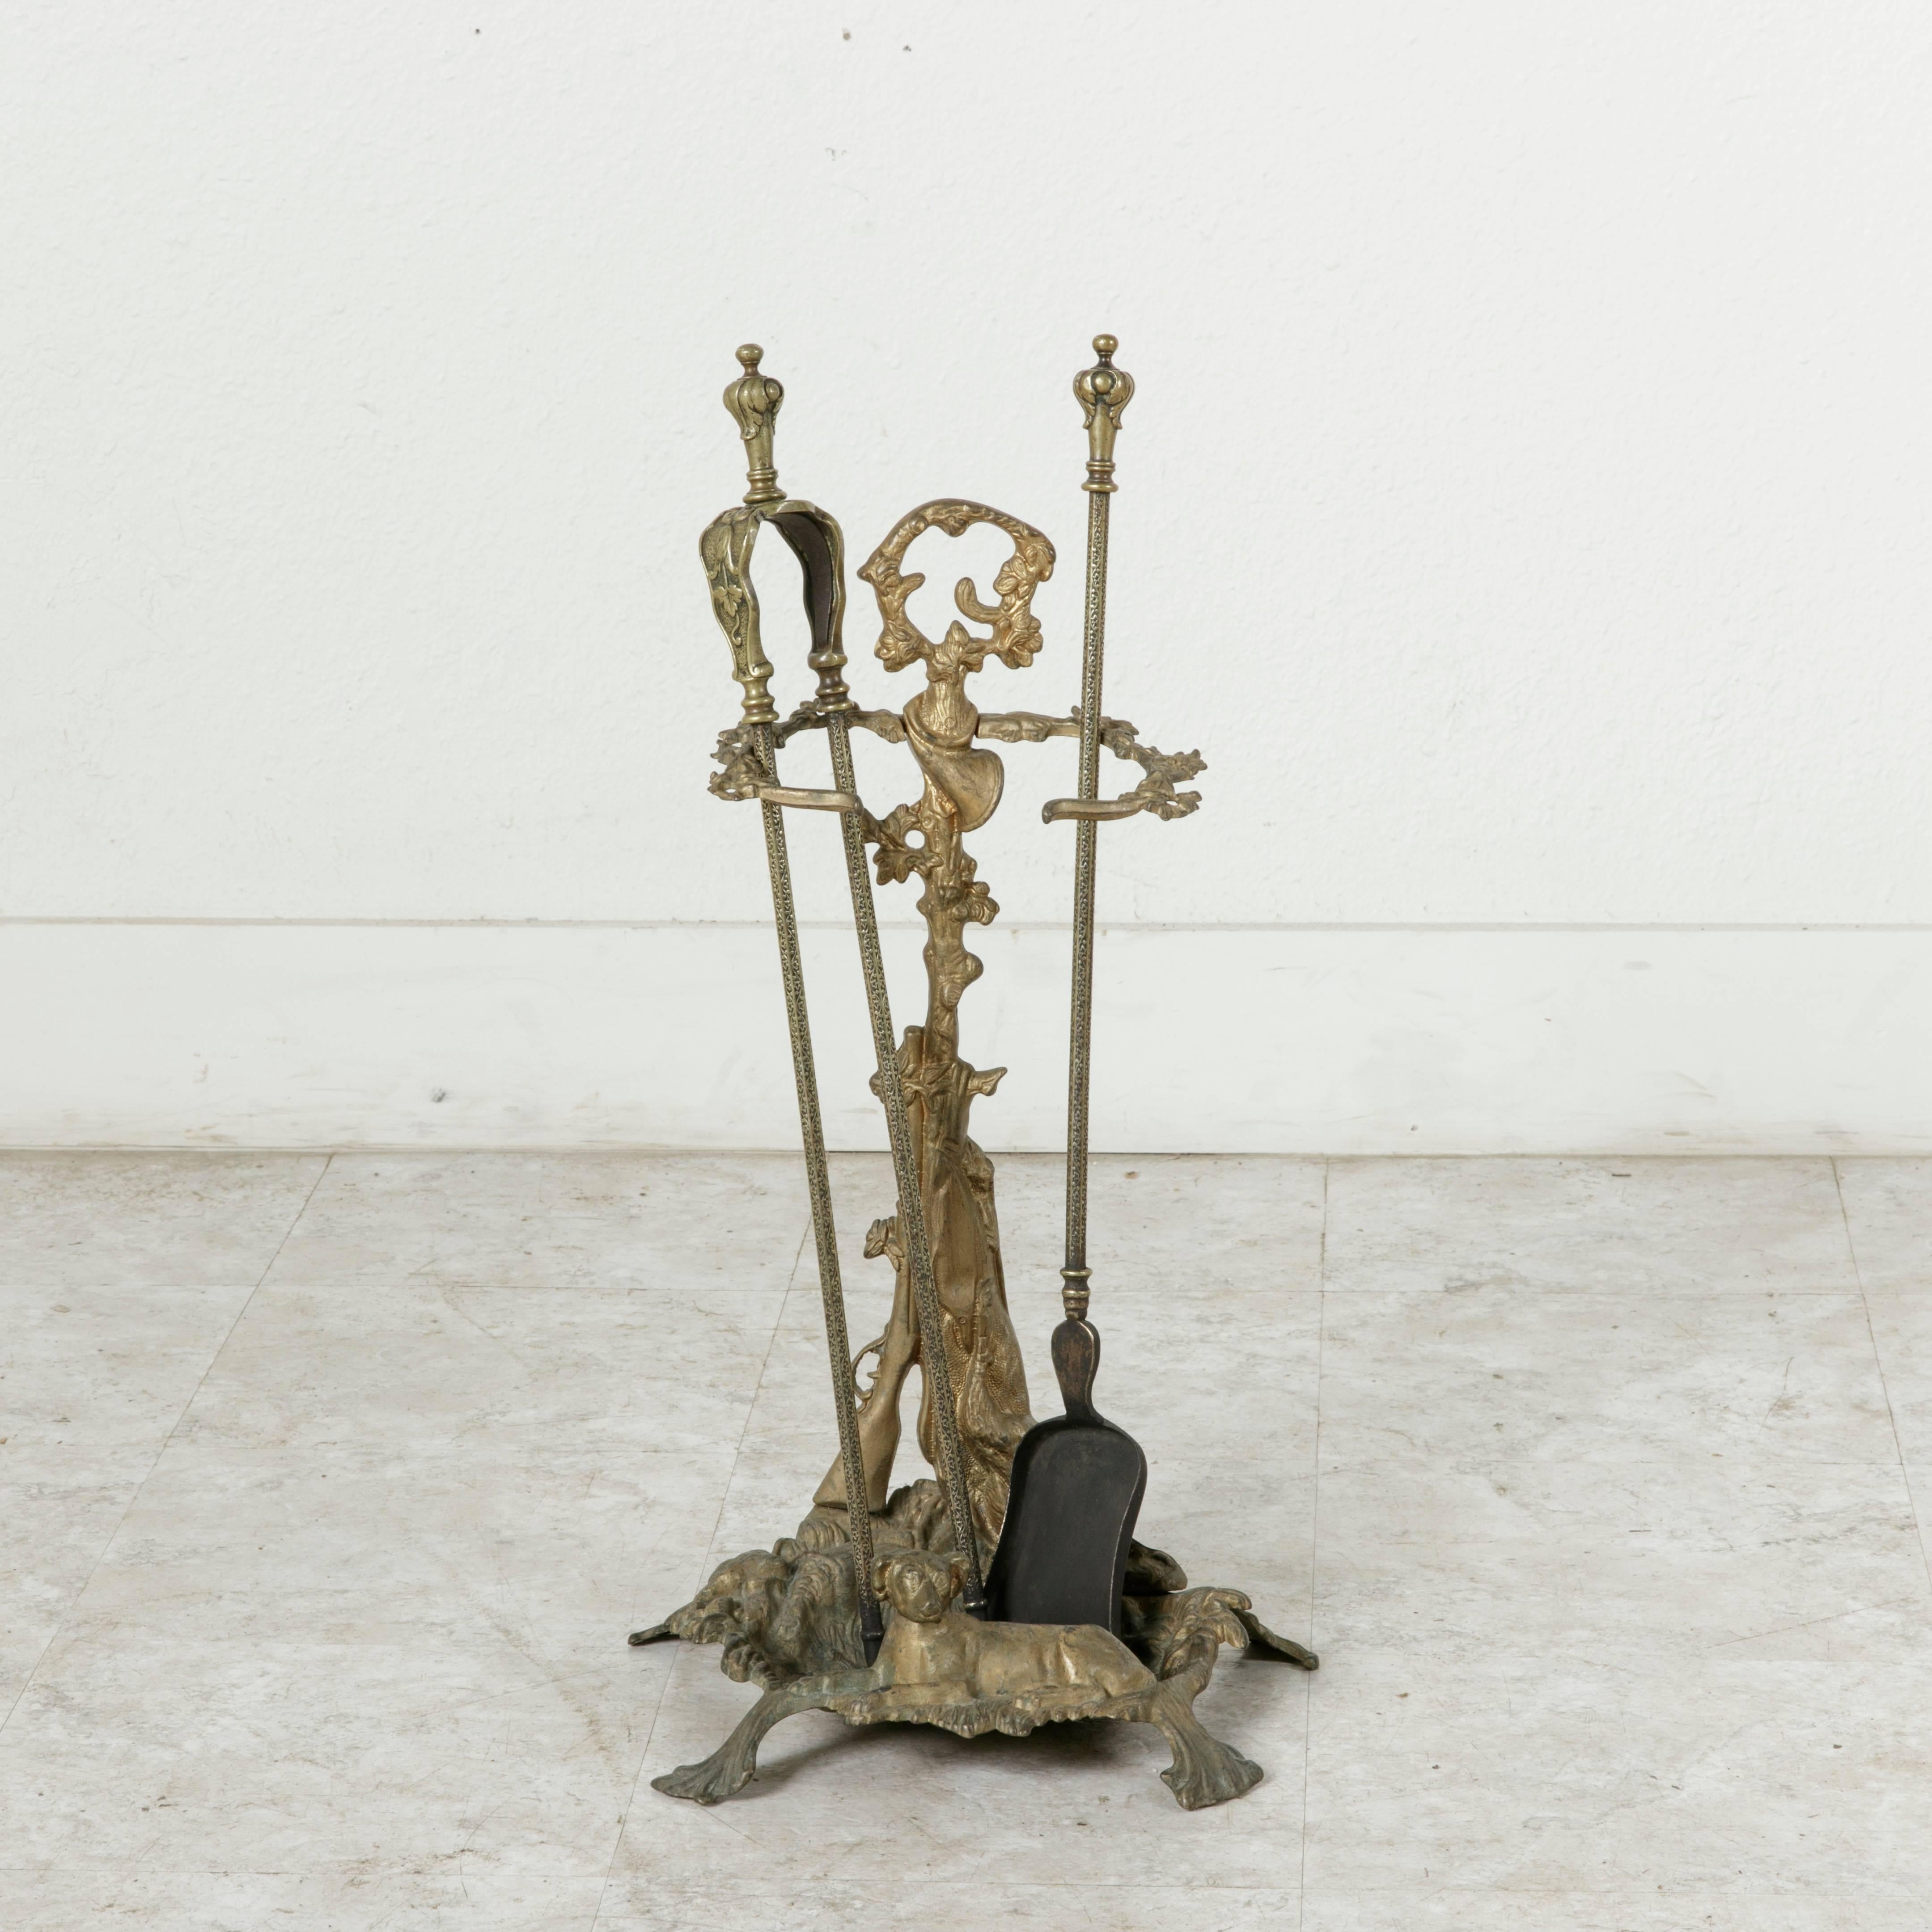 This set of fireplace tools includes its bronze stand with hunting motif, a shovel, and a pair of tongs. The stand features a hunting dog with a head that turns, lying down at the front of the base. Behind him a hunting rifle leans upon a tree